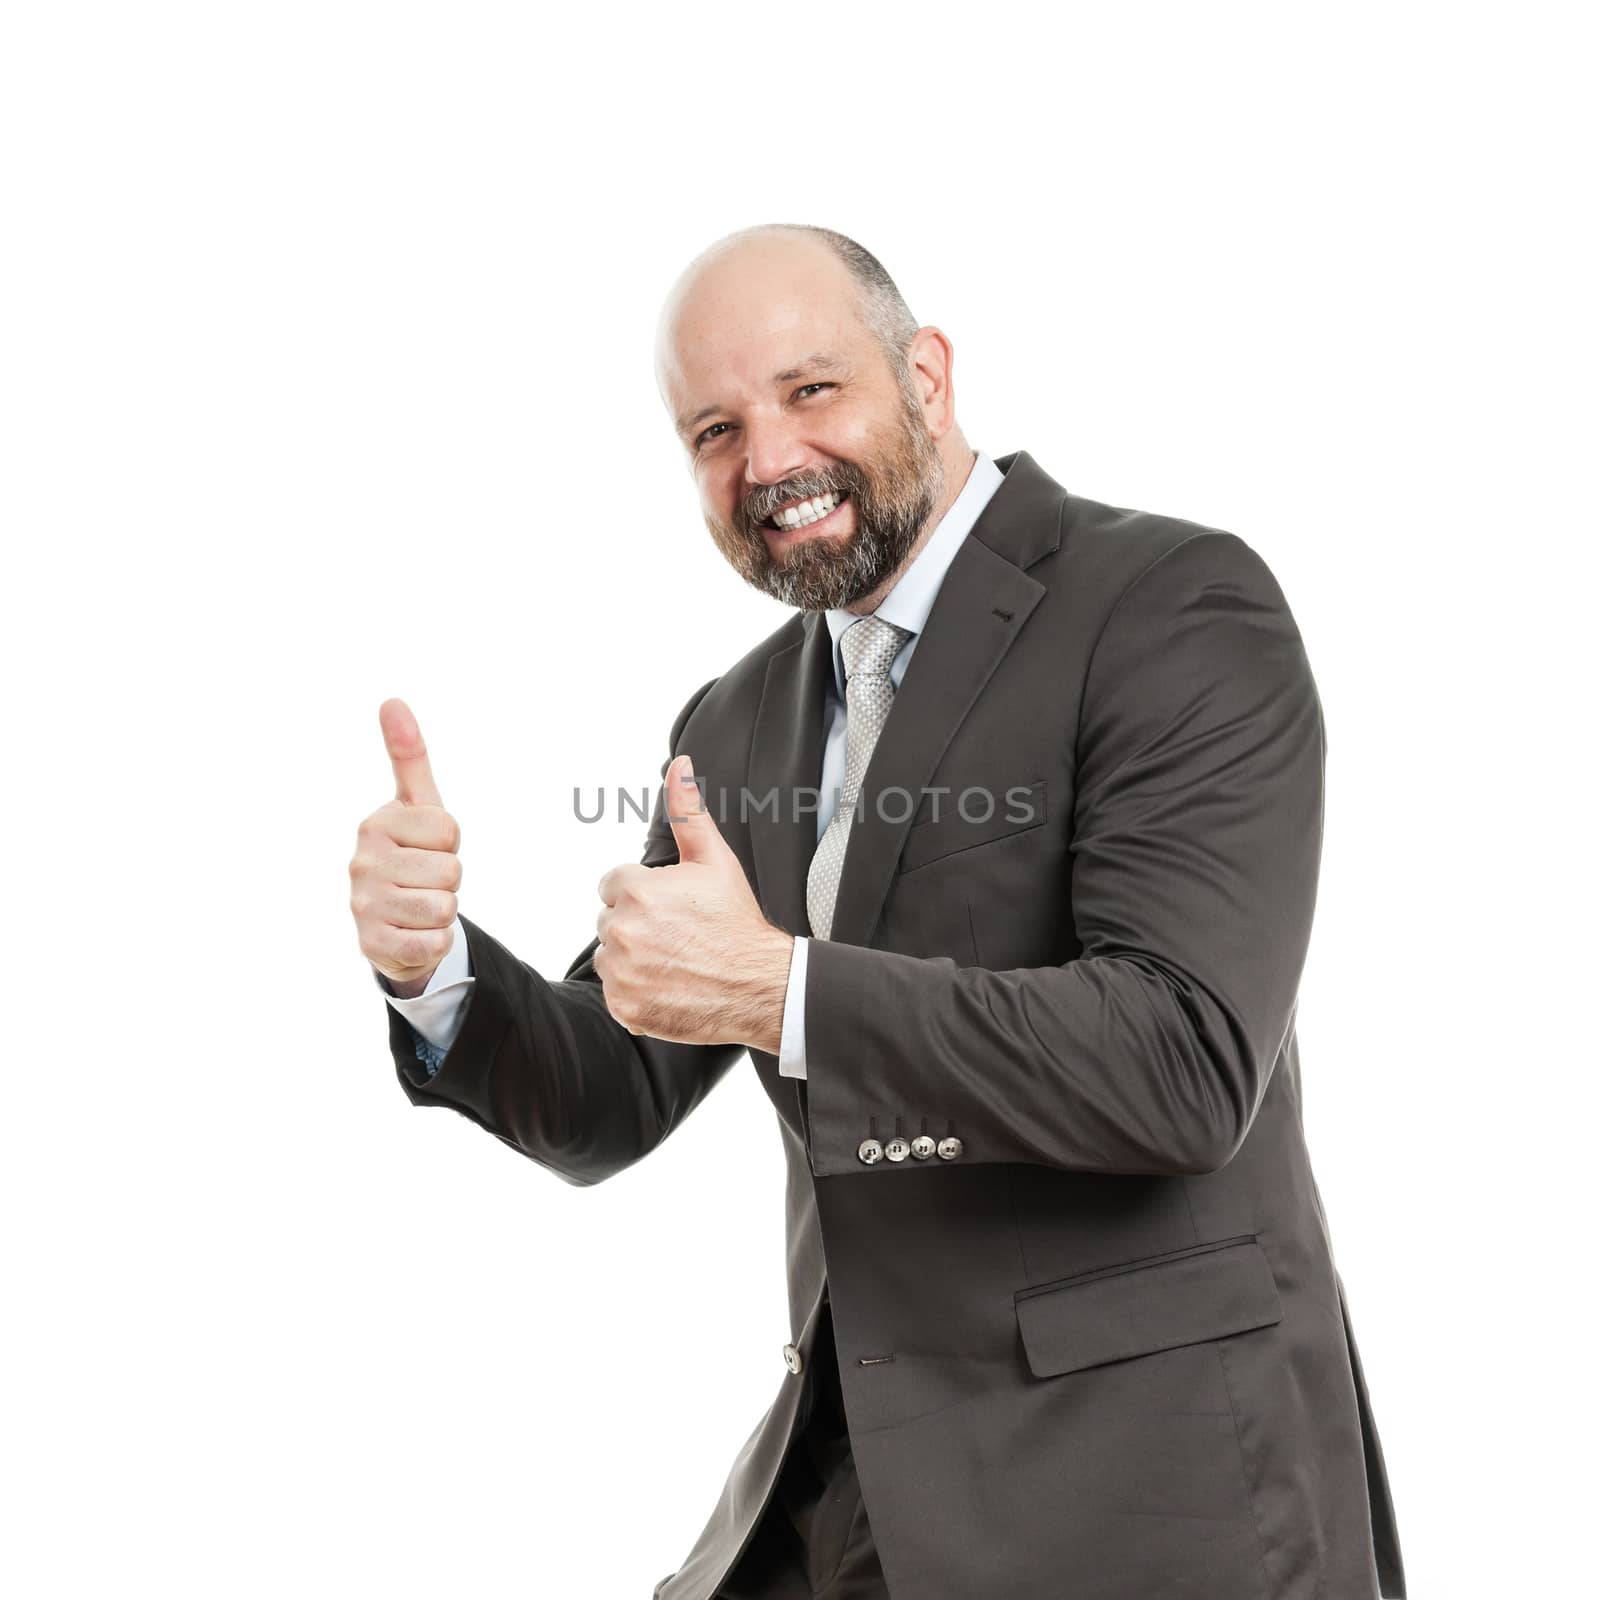 An image of a handsome business man with his thumbs up